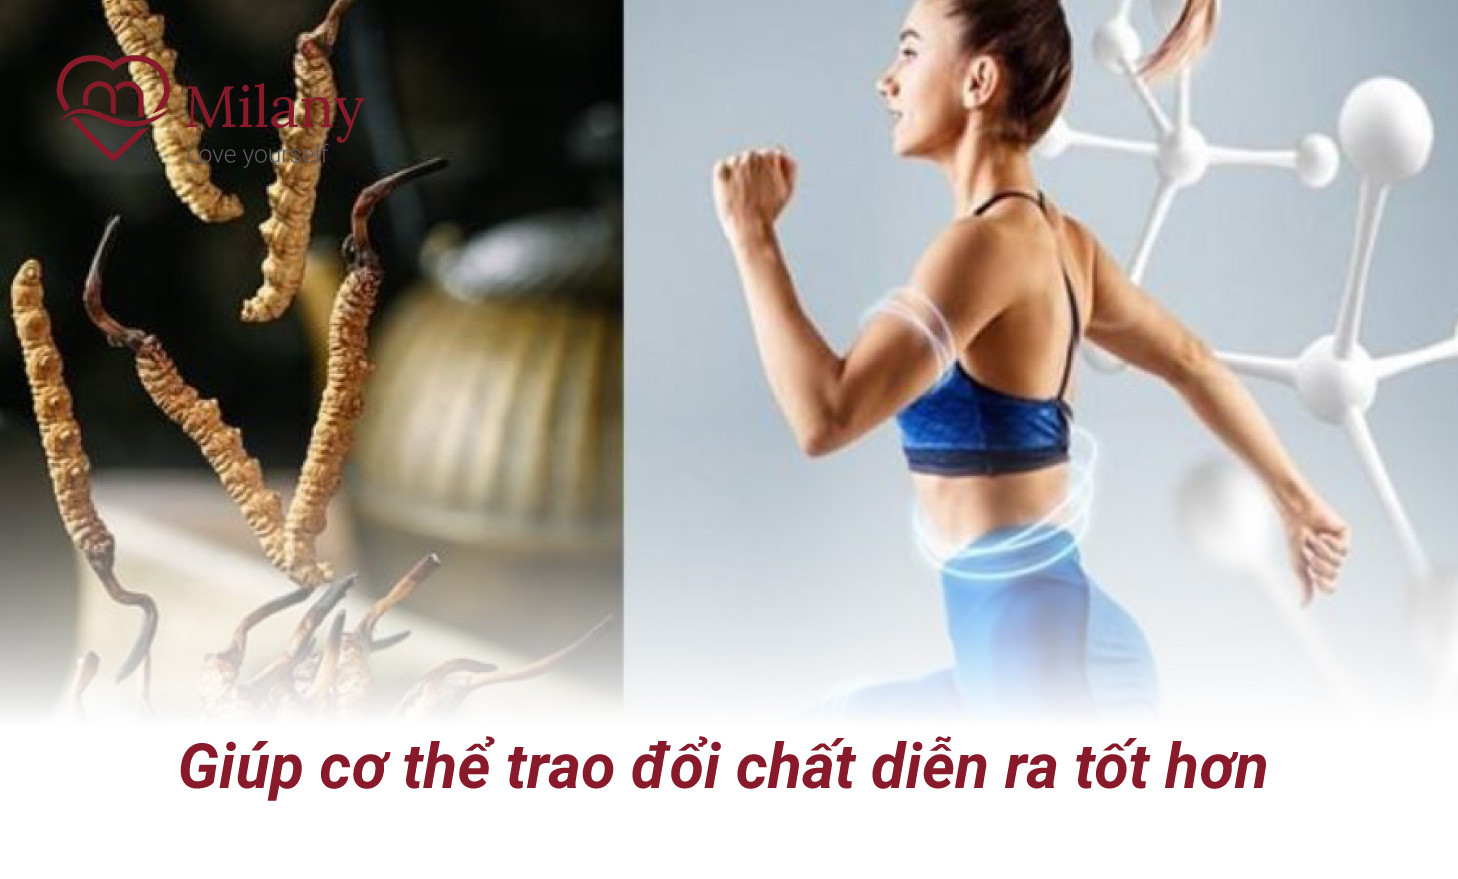 dong trung ha thao giup co the trao doi chat